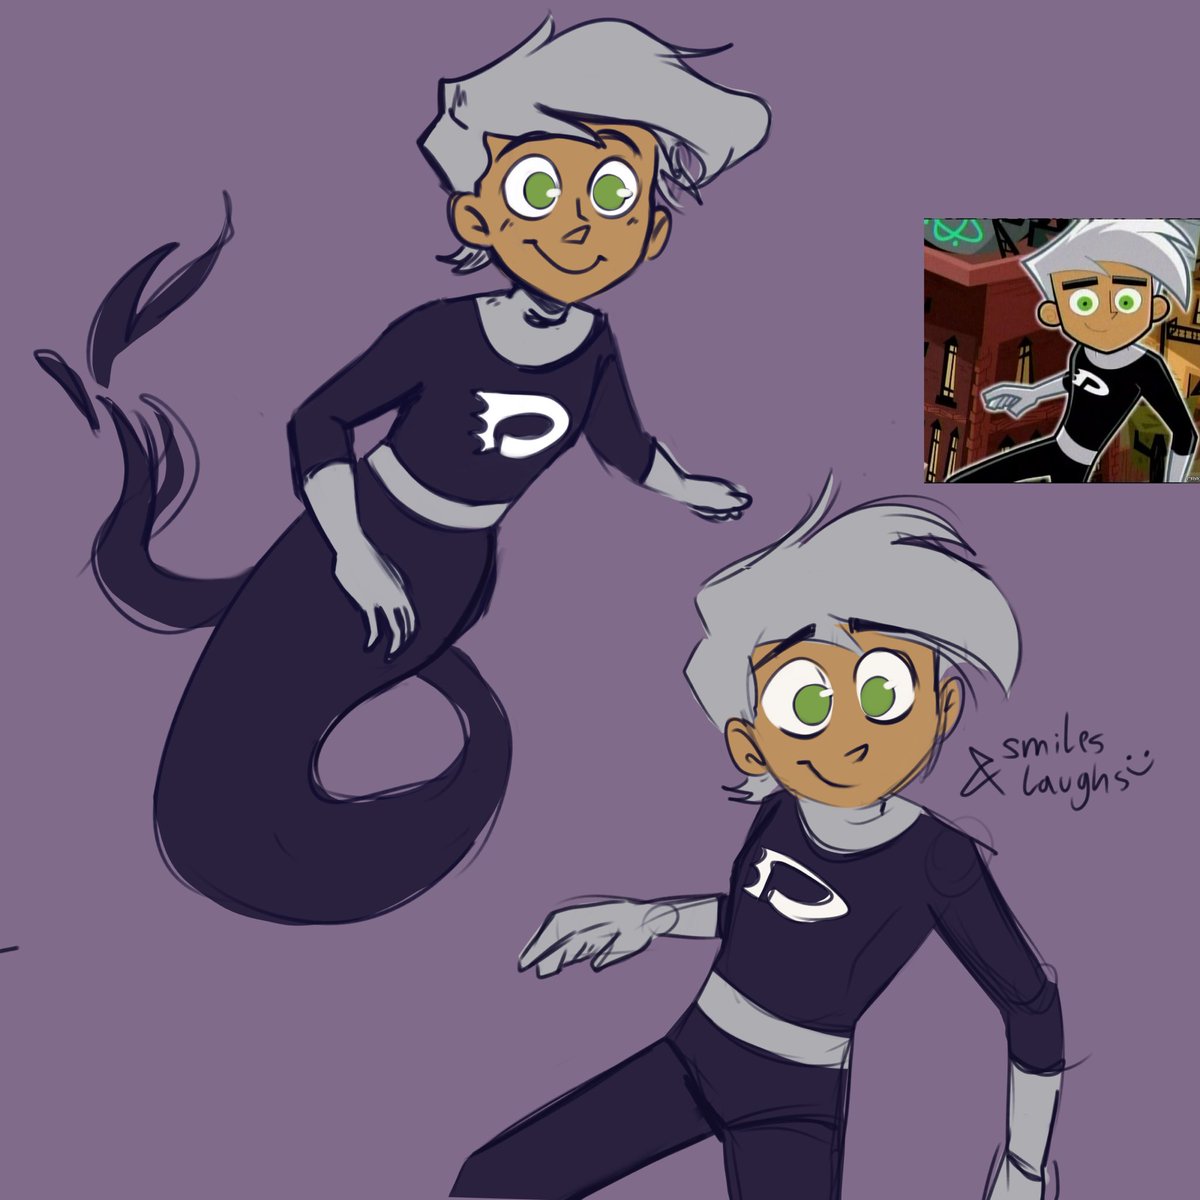 here’s some silly sketches #dannyphantom